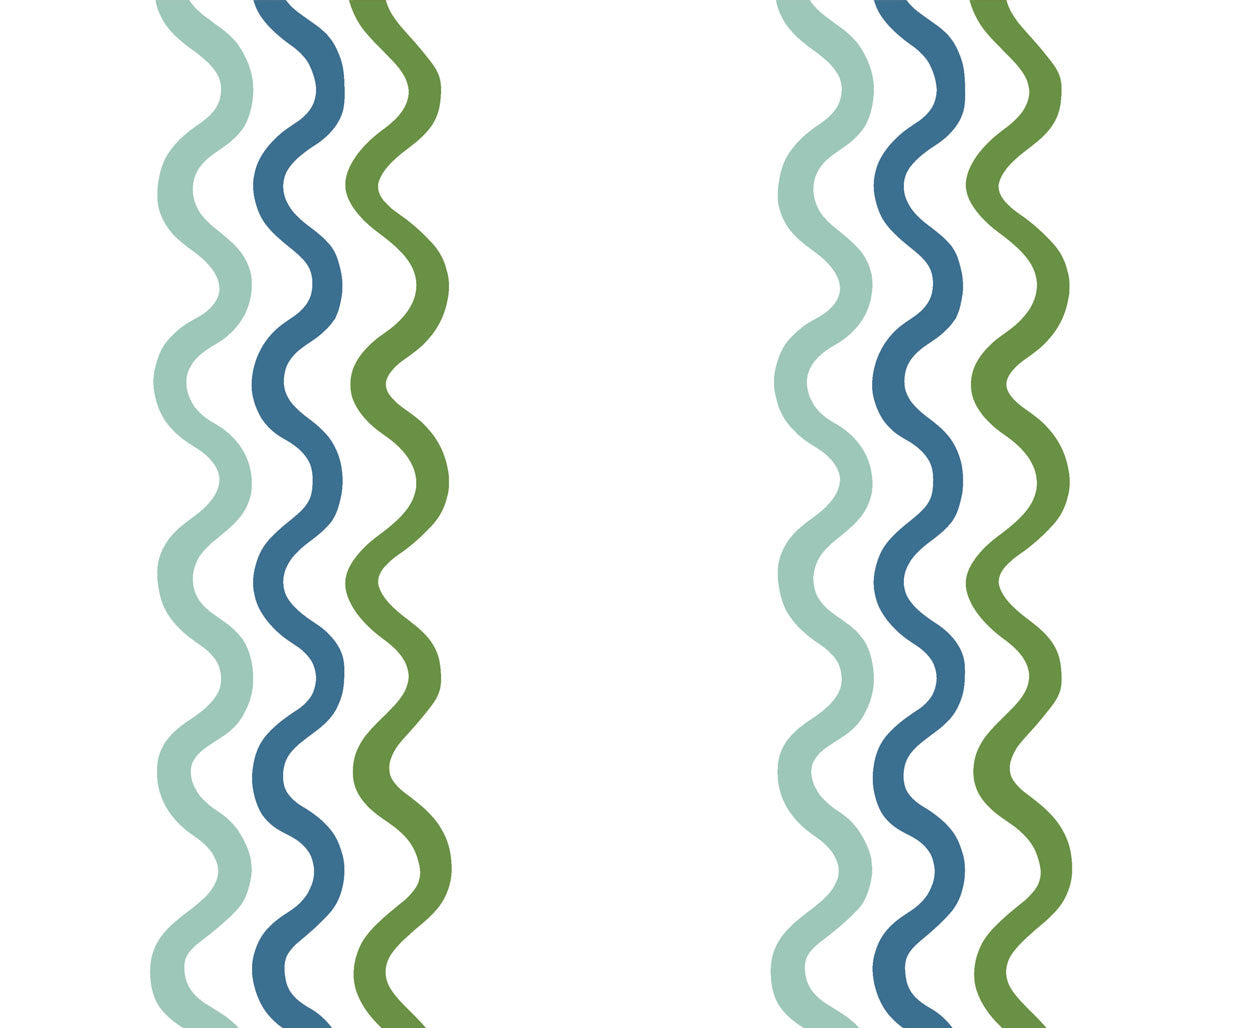 Detail of fabric in a wavy stripe print in teal and green on a white field.